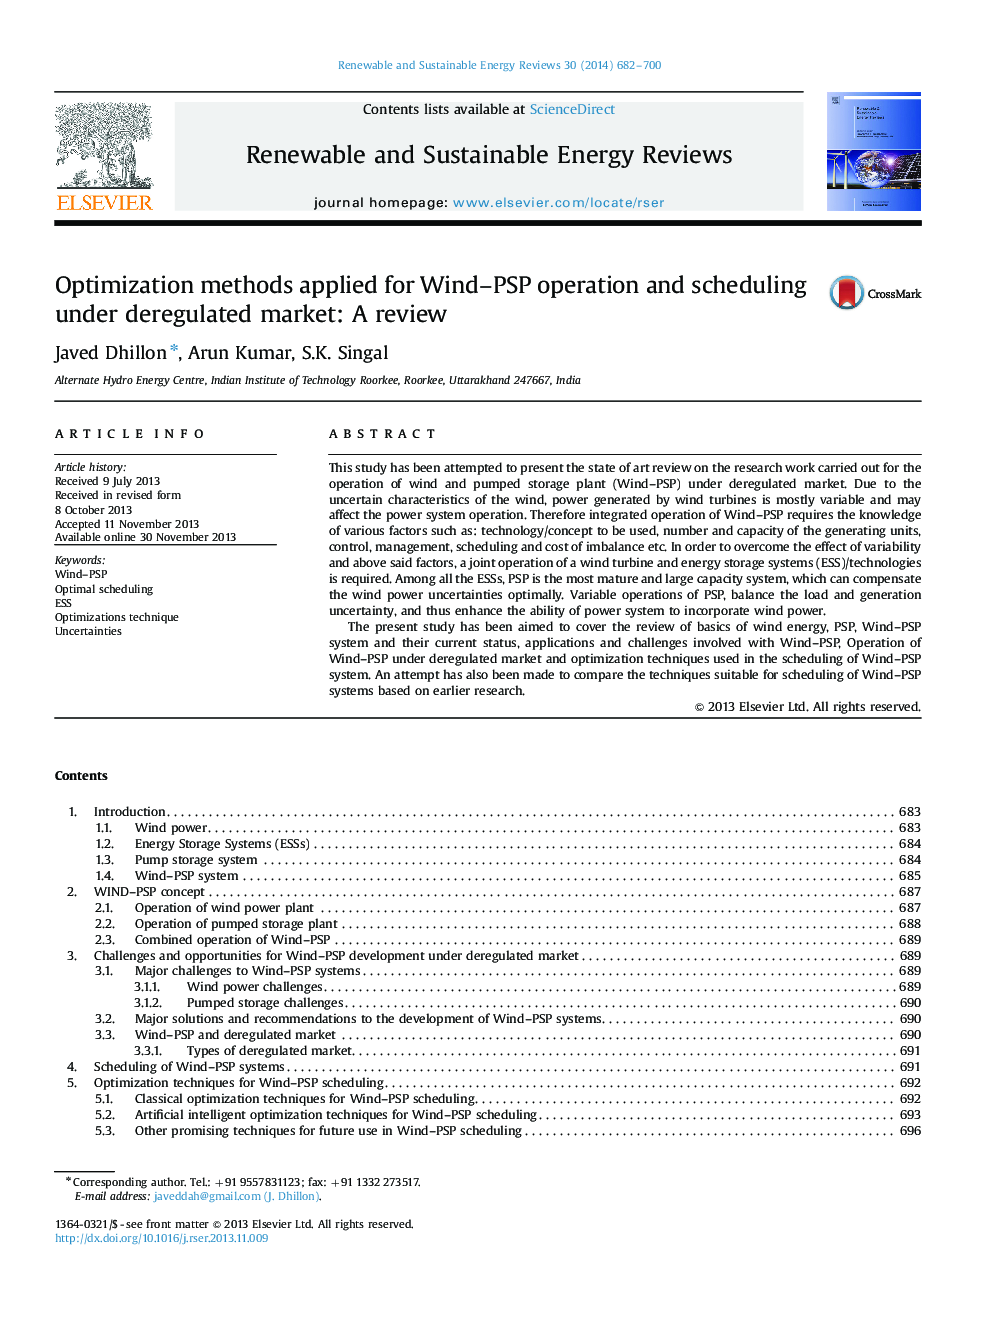 Optimization methods applied for Wind-PSP operation and scheduling under deregulated market: A review